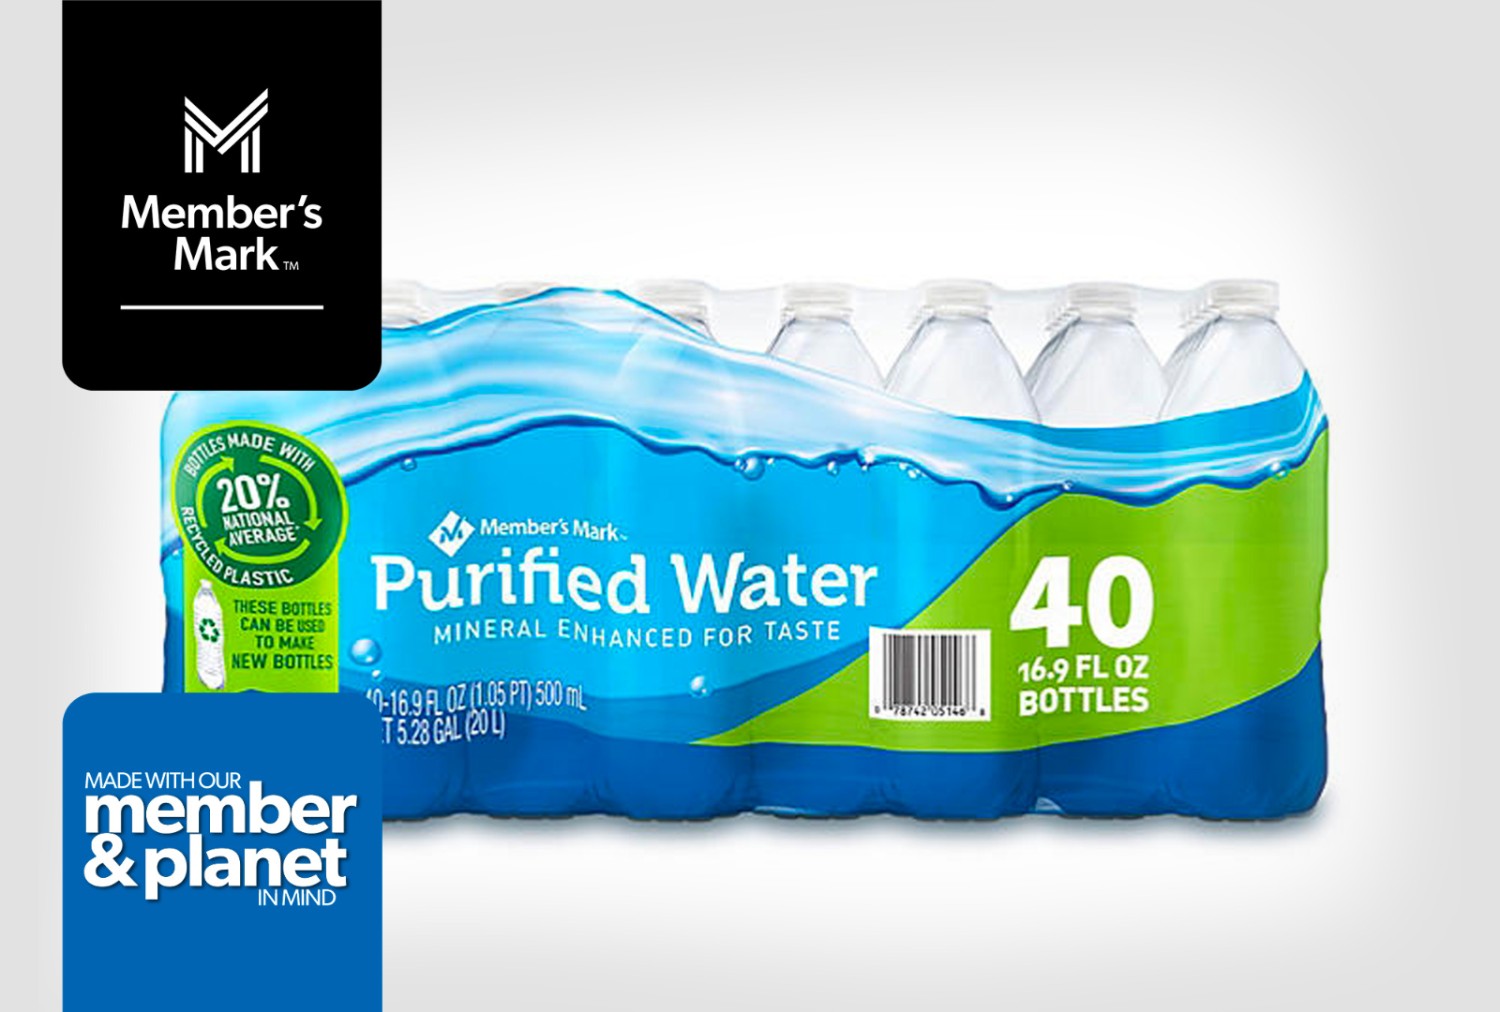 These Member's Mark Products Benefit Our Members and the Planet